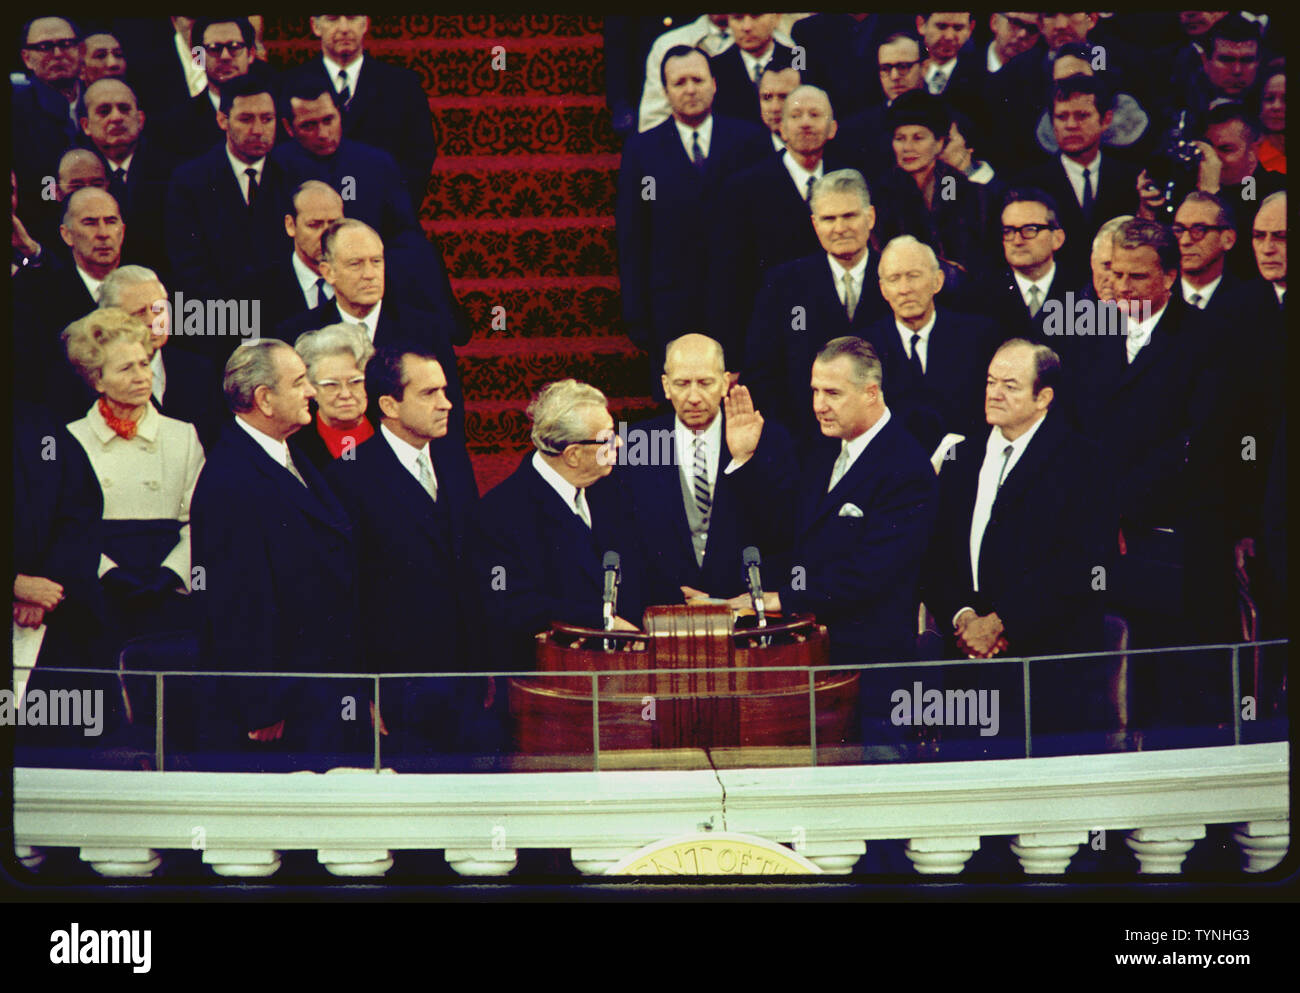 Vice-President elect Agnew takes the oath of office; Scope and content:  Pictured: Lyndon Baines Johnson, Richard M. Nixon, Everett Dirksen, ?, Spiro T. Agnew, Hubert H. Humphrey. Subject: Inauguration - 1969. Stock Photo